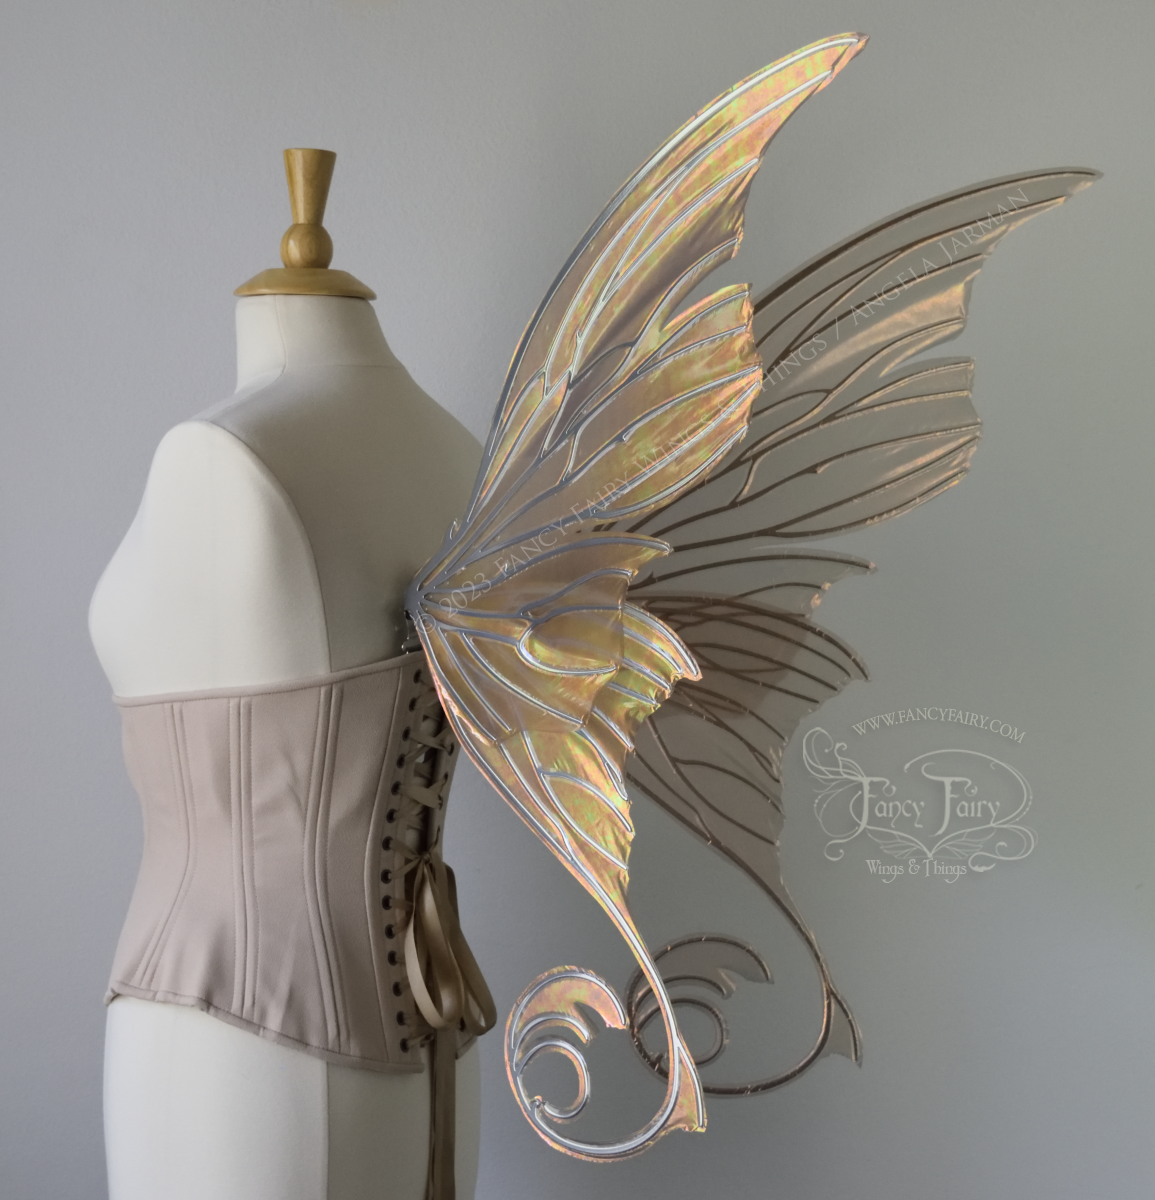 Back 3/4 view of an ivory dress form wearing an alabaster underbust corset and large rose gold iridescent fairy wings with lots of intricate silver veins, some have 'thorns'. Upper panels curve slightly downwards along top edge with pointy tips, bottom panels have tails